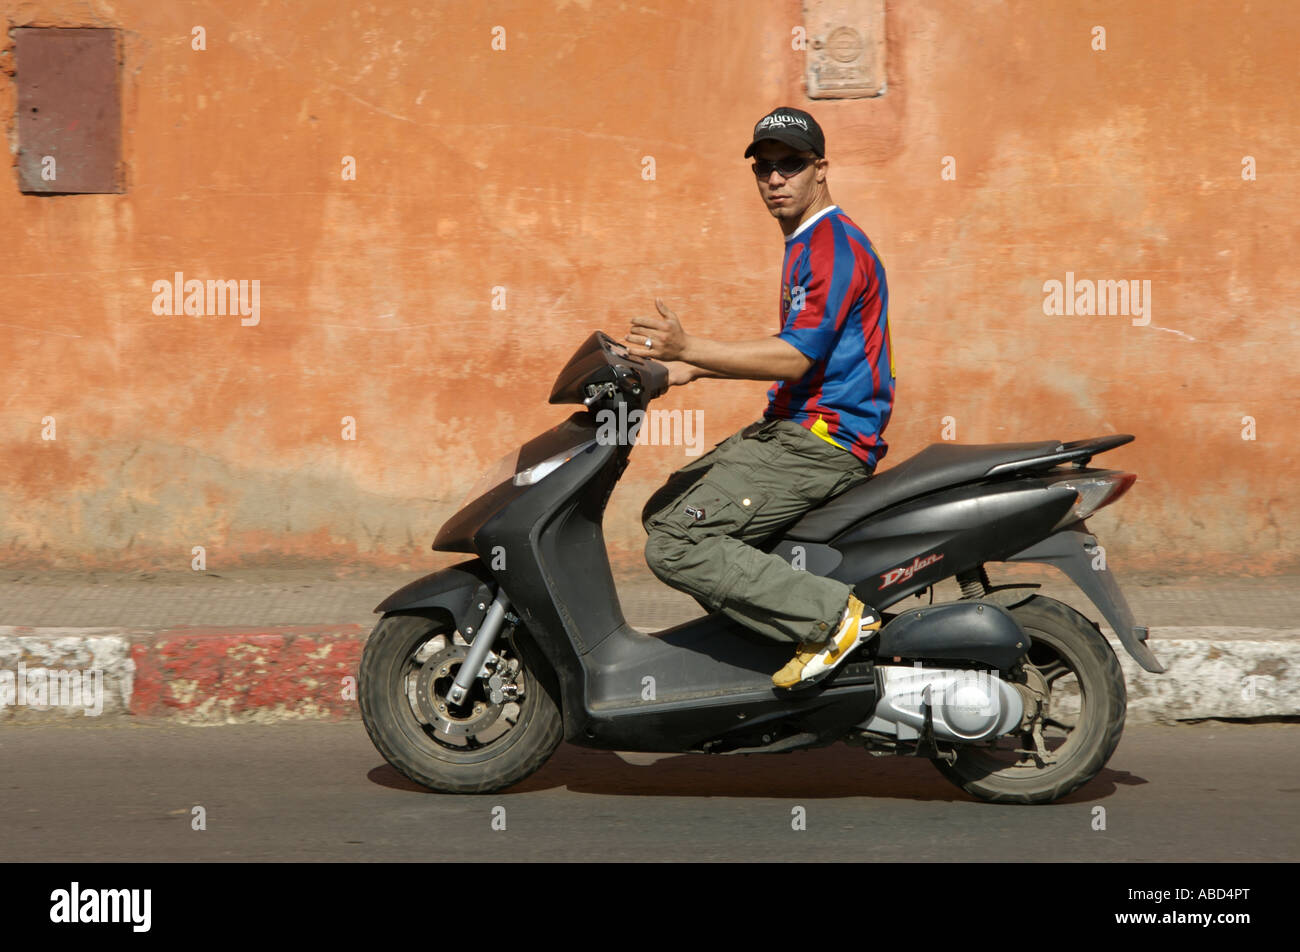 homme sur scooter Photo Stock - Alamy